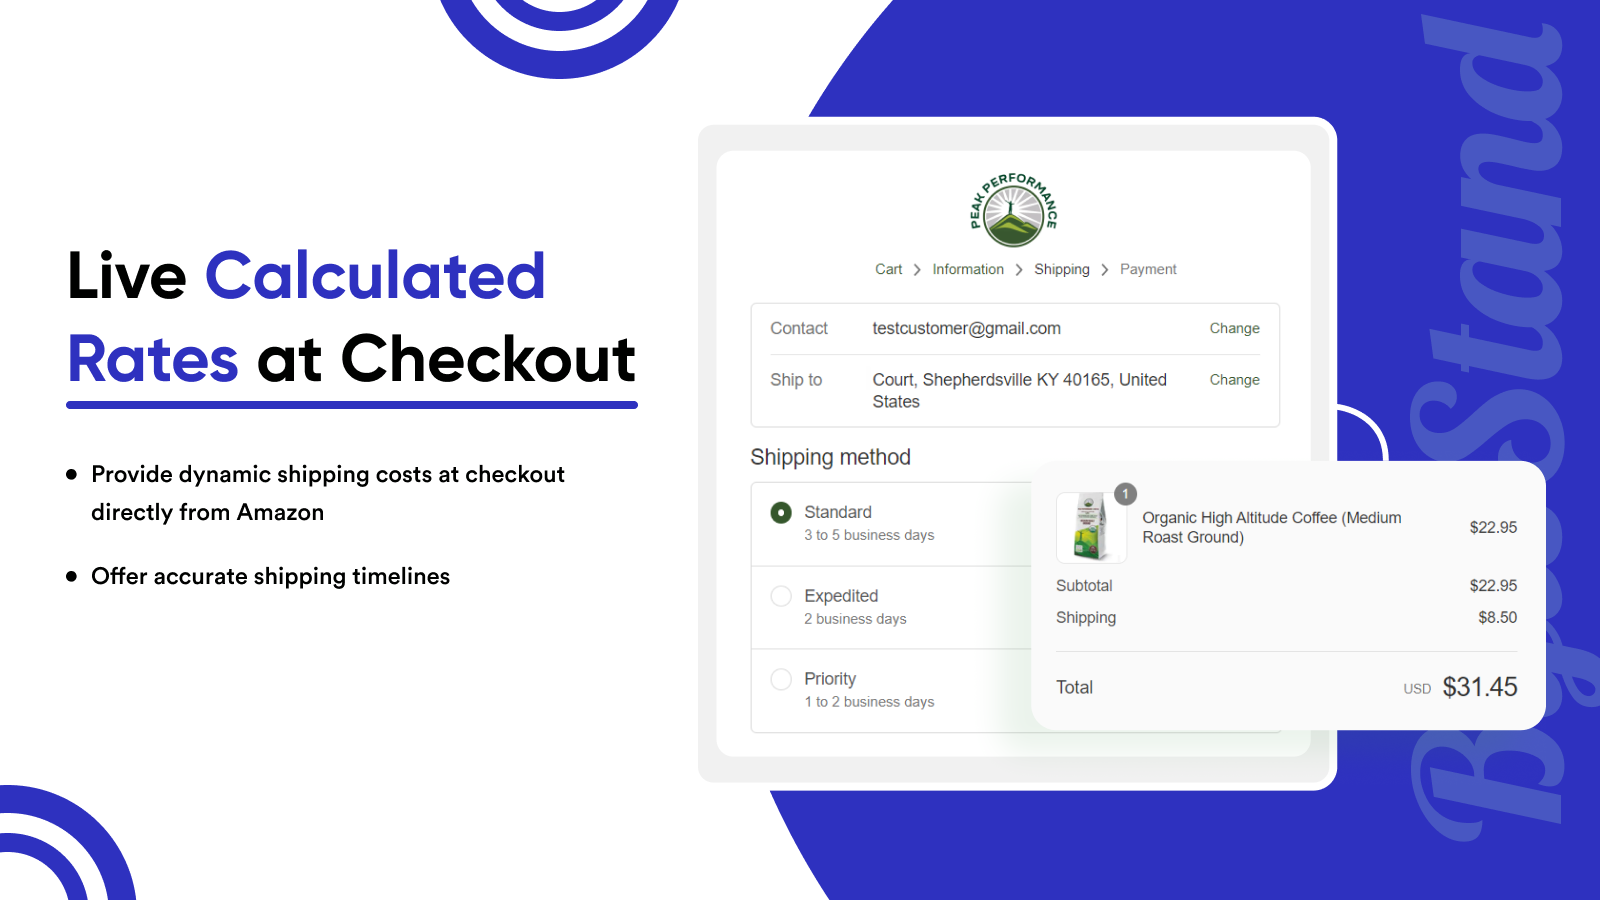 Live calculated rates at checkout with shipping timelines